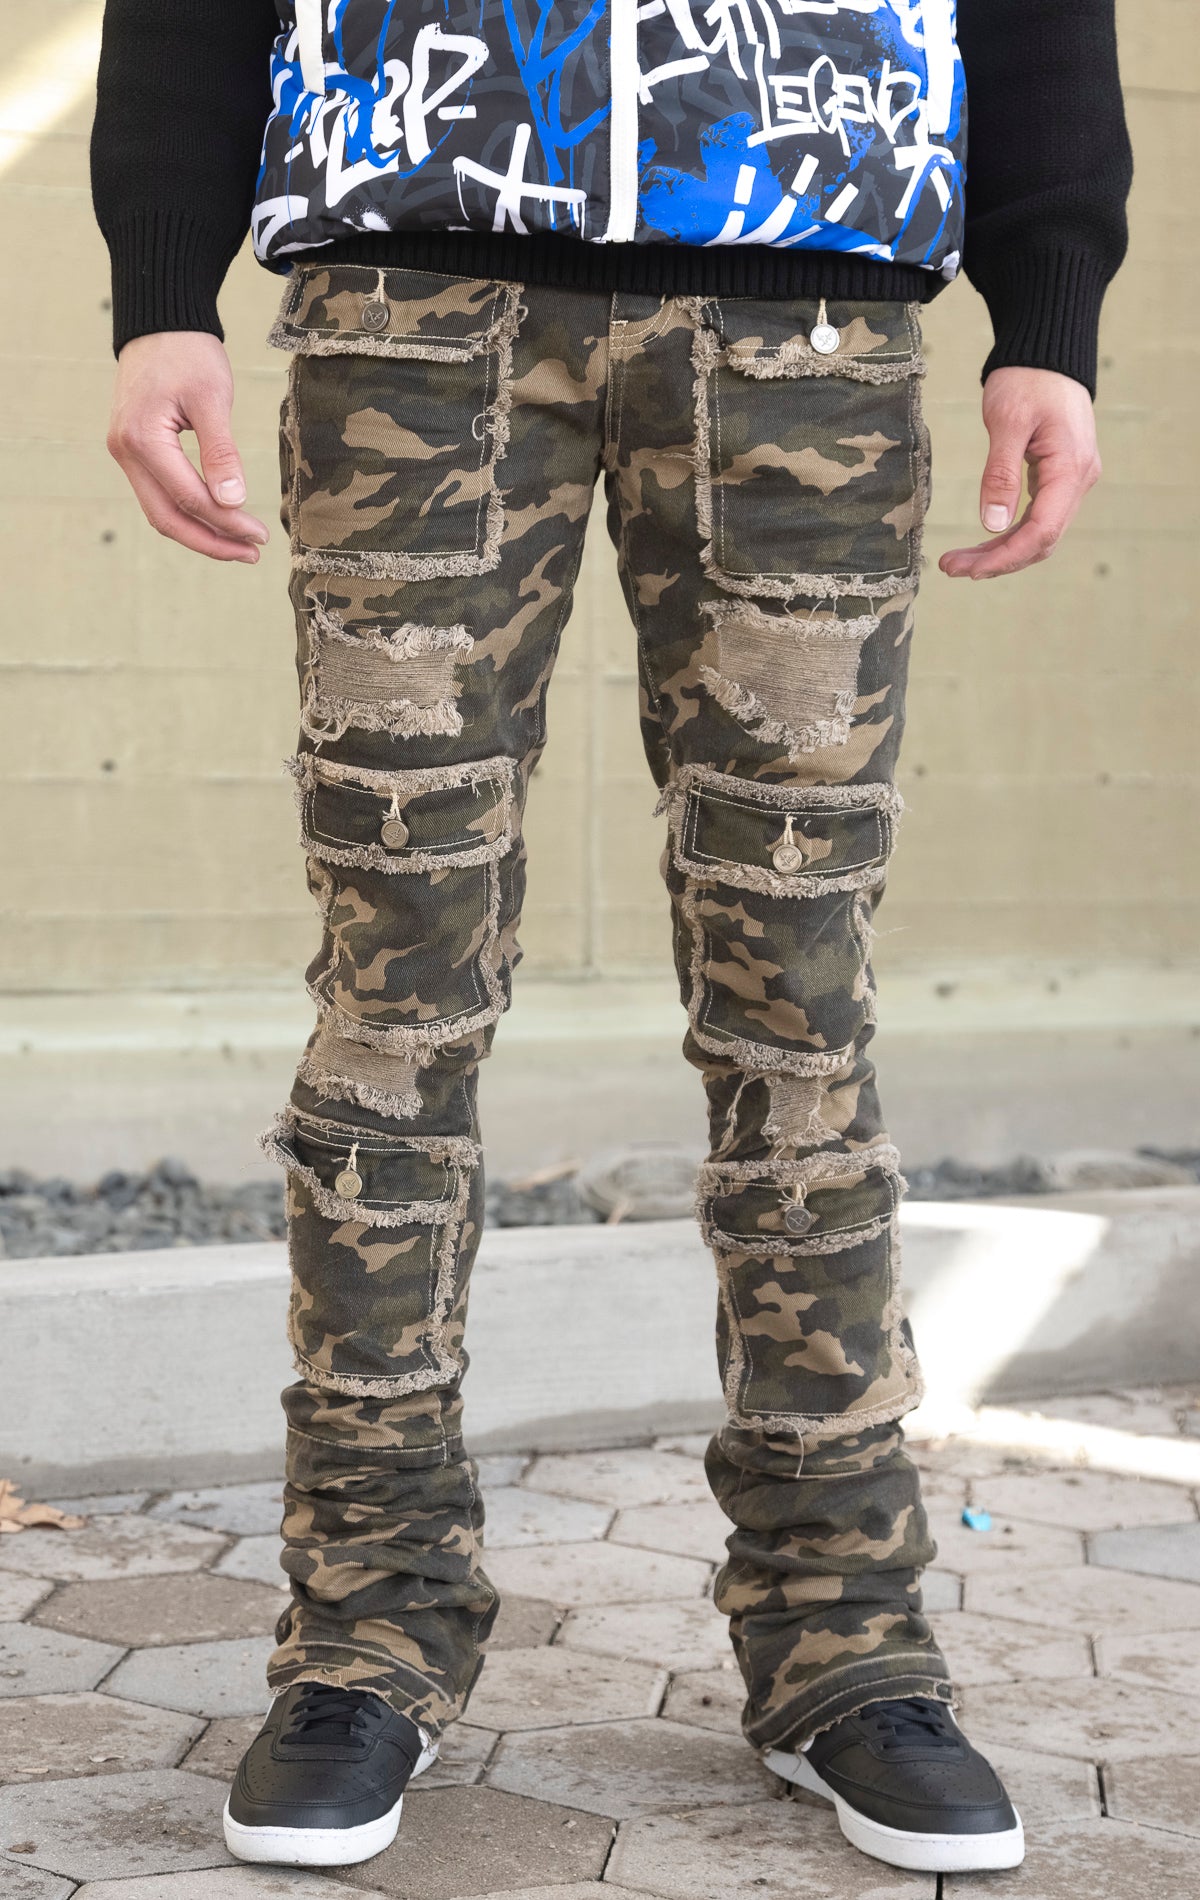 Camo super stacked jeans featuring an extra-long inseam and flared leg opening with distressing, stone washing and frays.